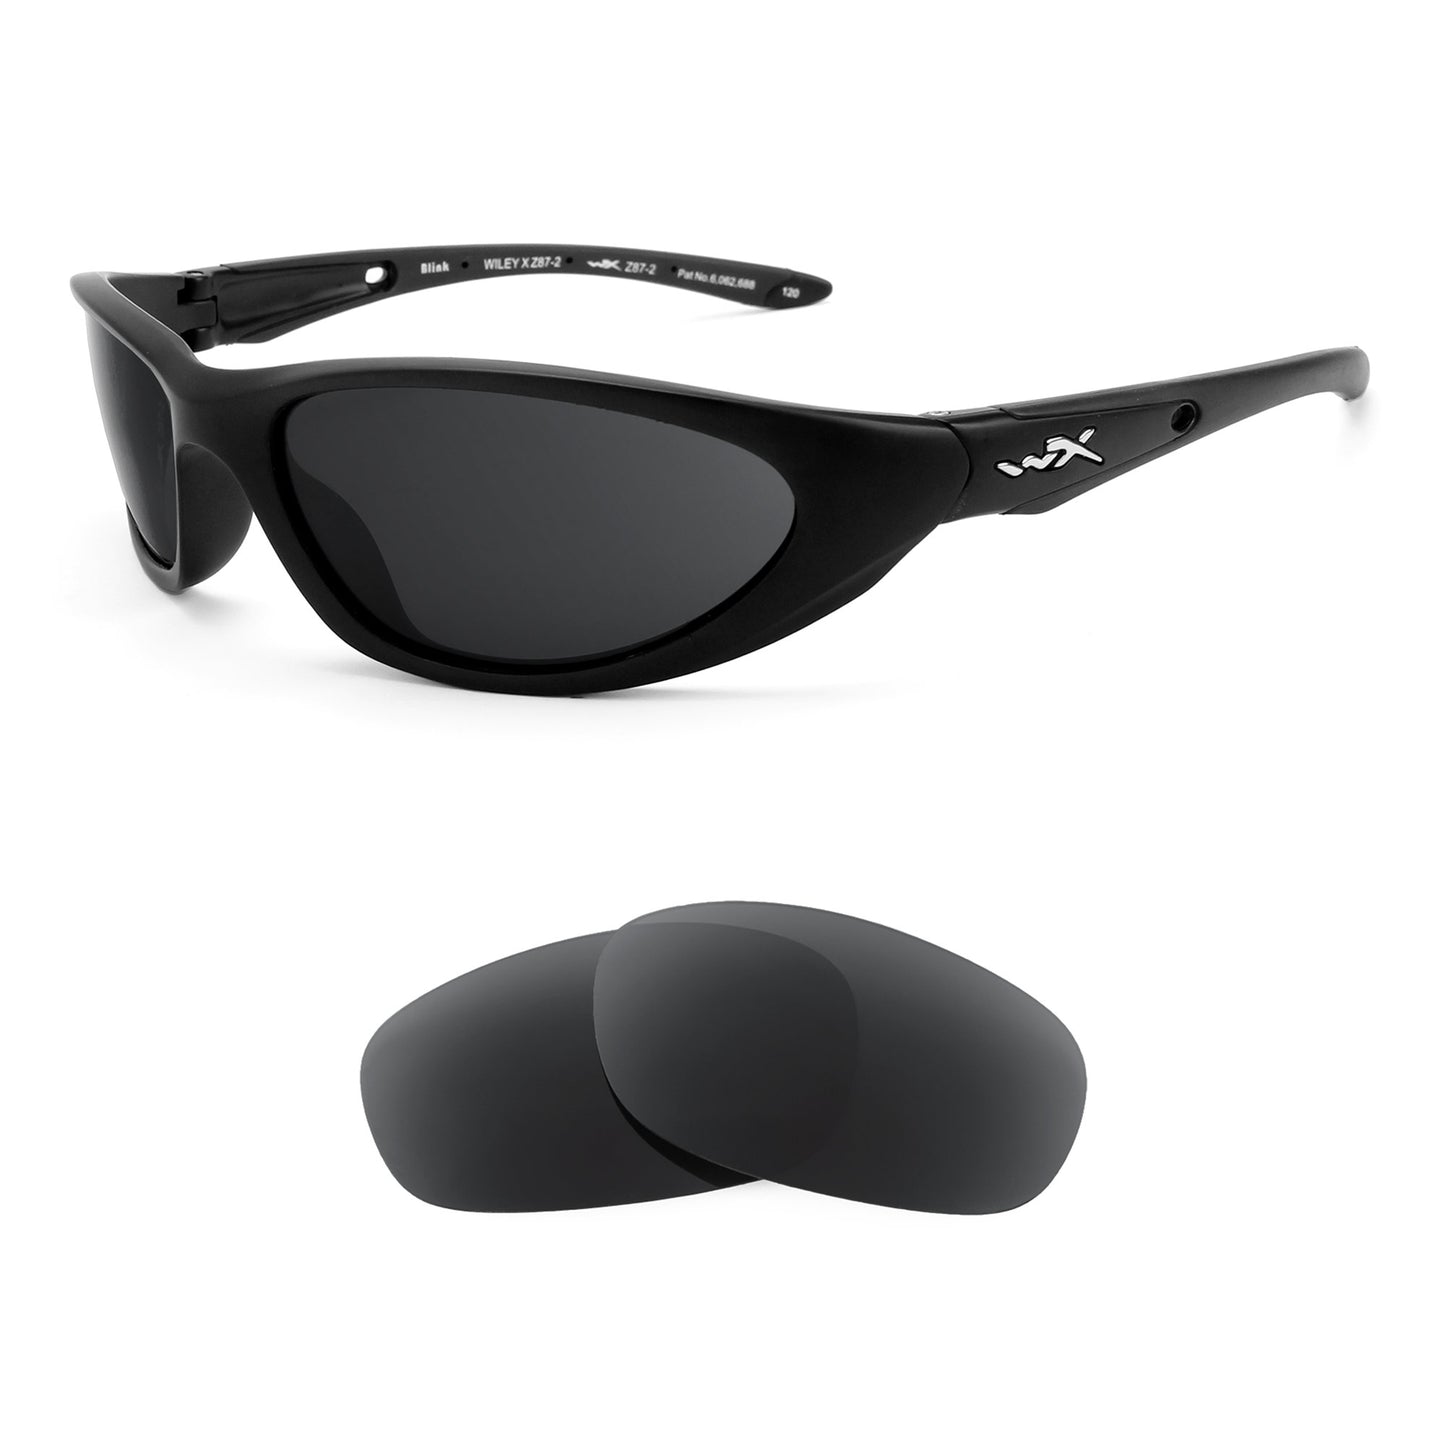 Wiley X Blink sunglasses with replacement lenses